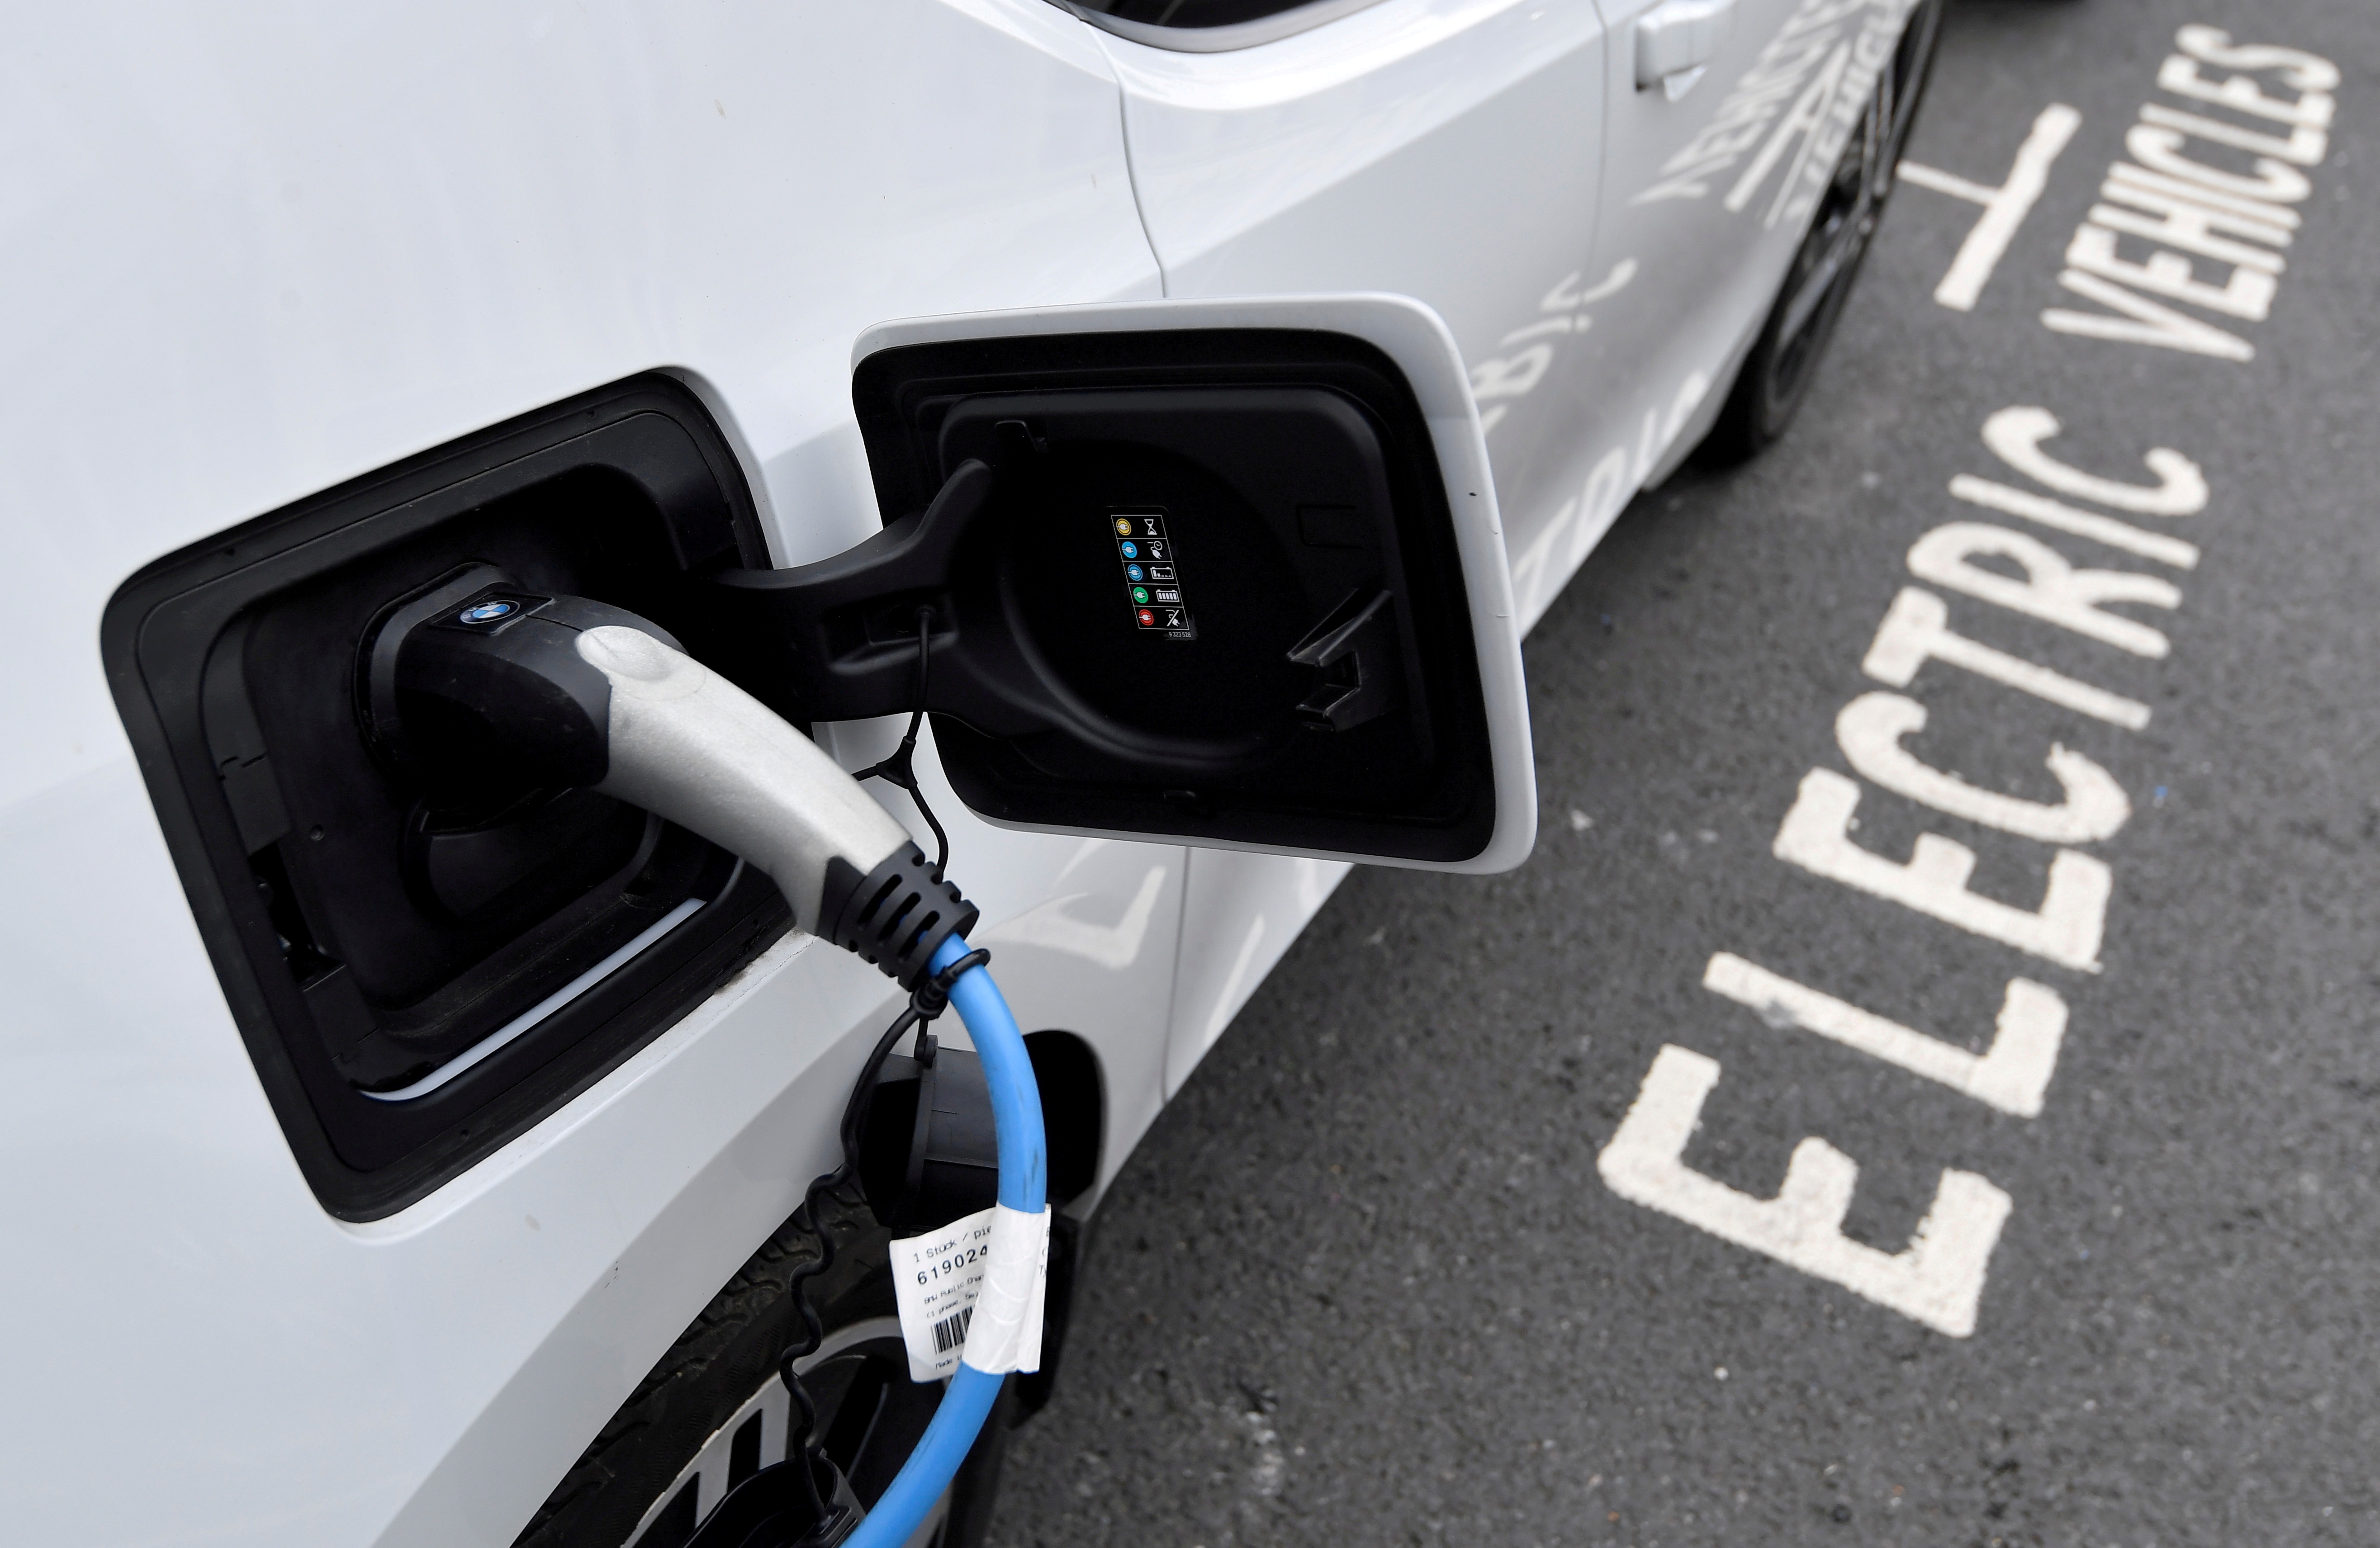 An electric car is charged at a roadside EV charge point, London, October 19, 2021. REUTERS/Toby Melville/File Photo